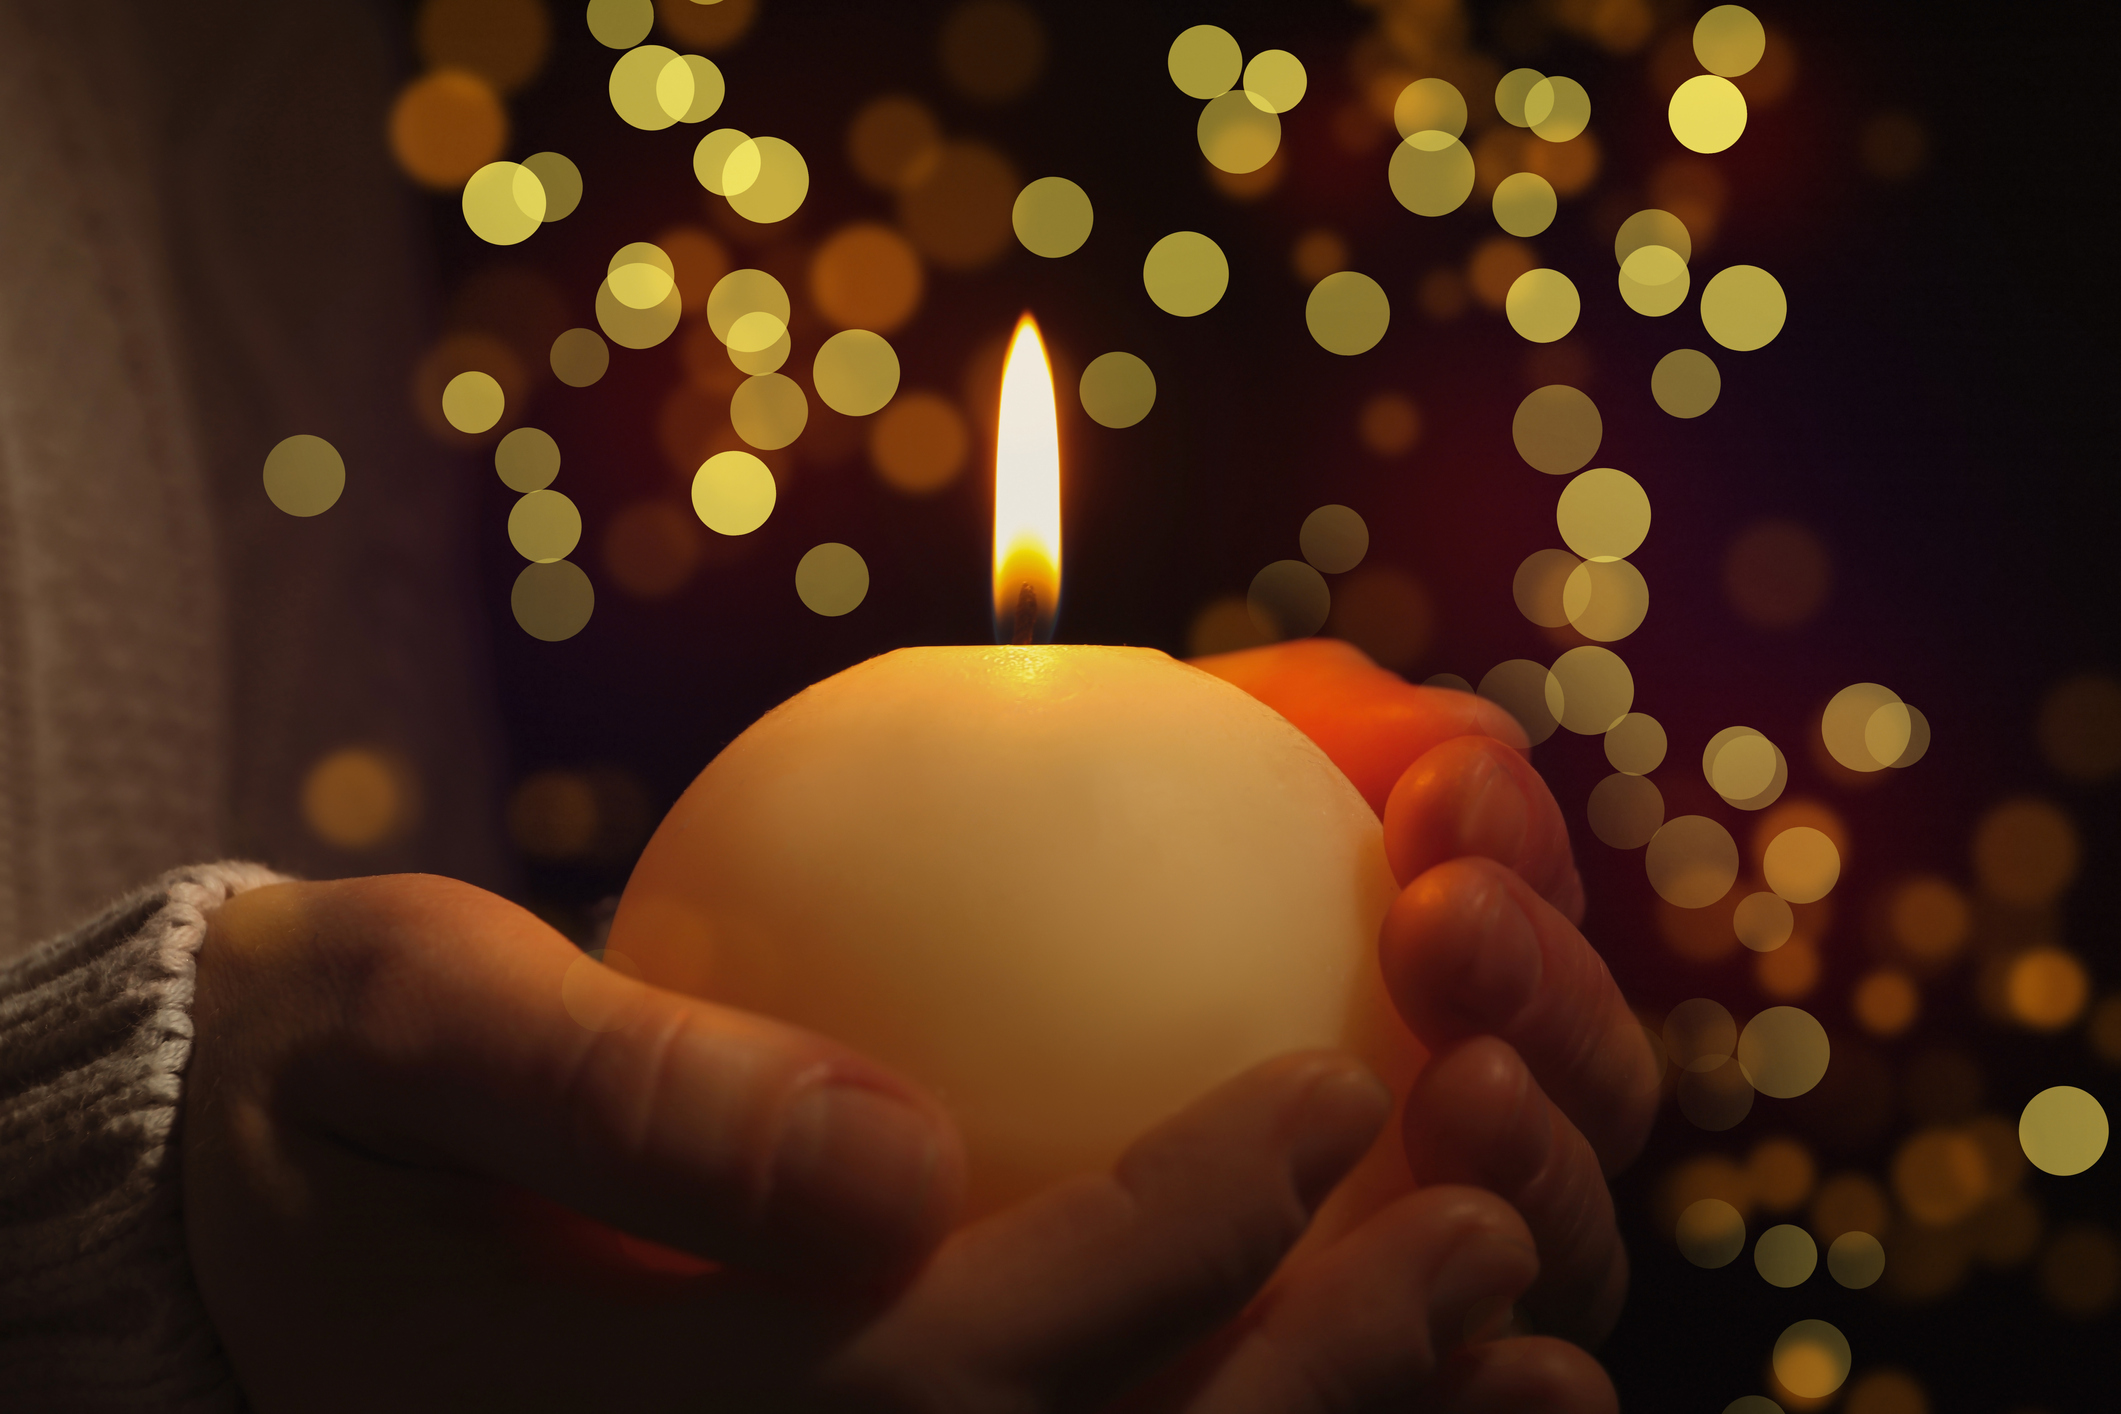 A guide to coping with grief at the holidays